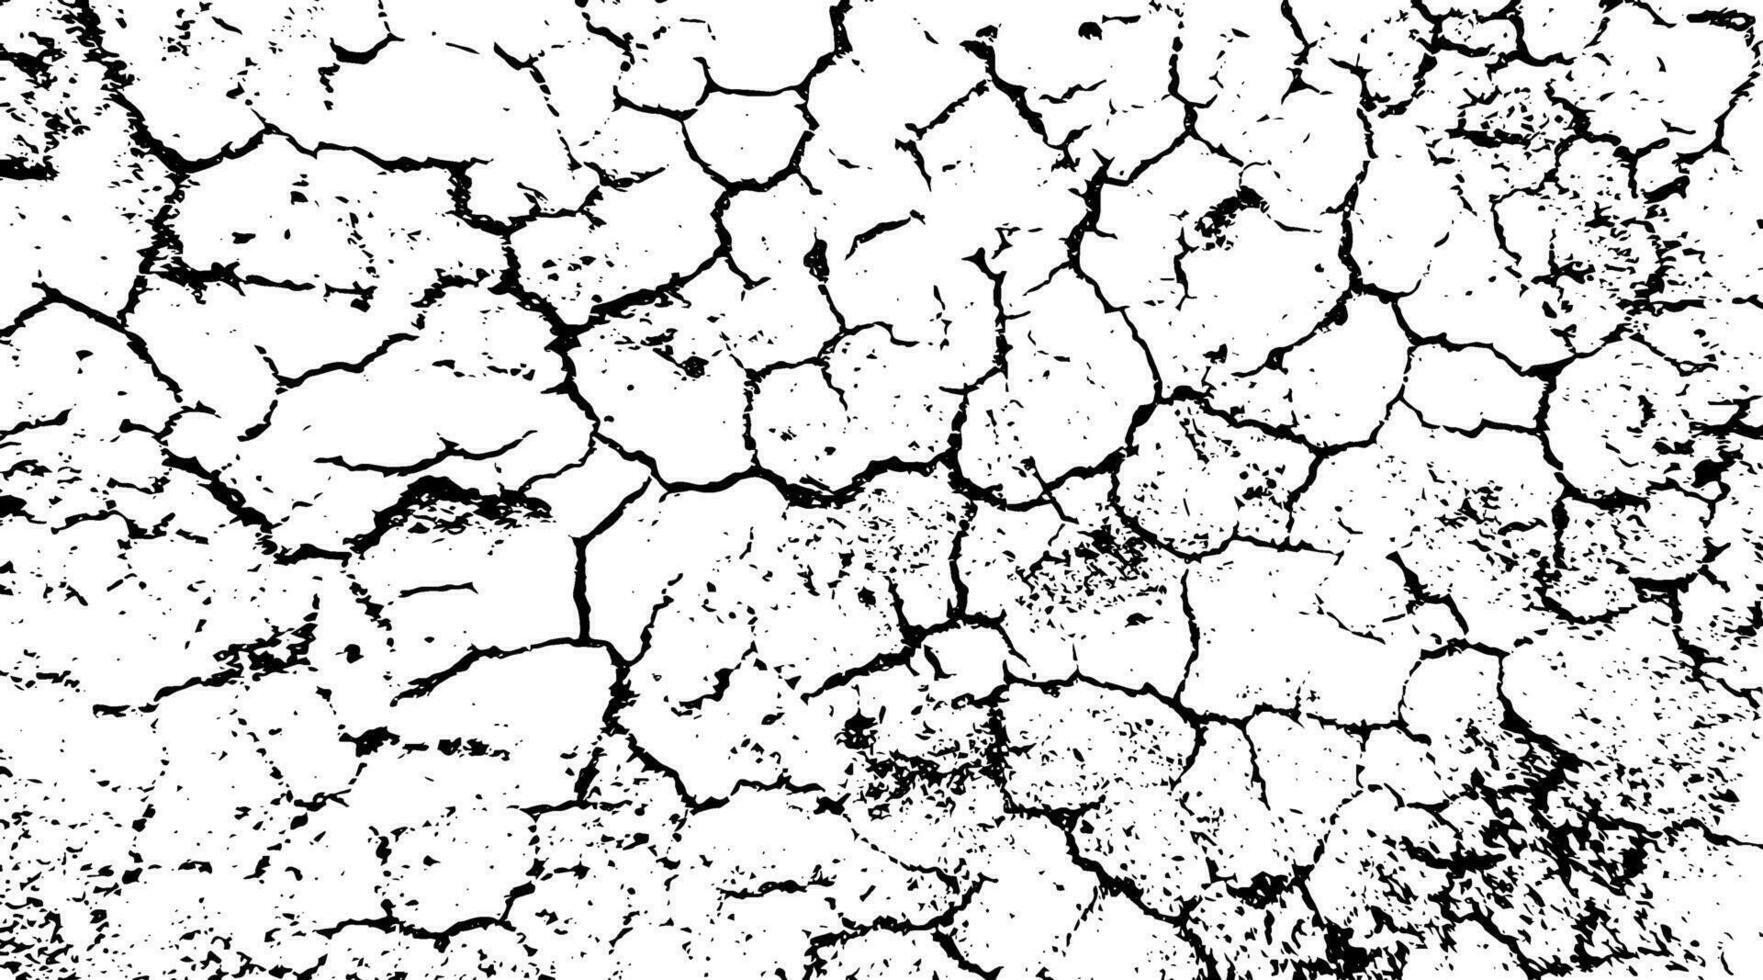 a black and white image of a cracked wall cracked cracked texture background, texture crack texture soil fractured texture cracks mud limestone concrete texture clay dried dusty texture crackle vector